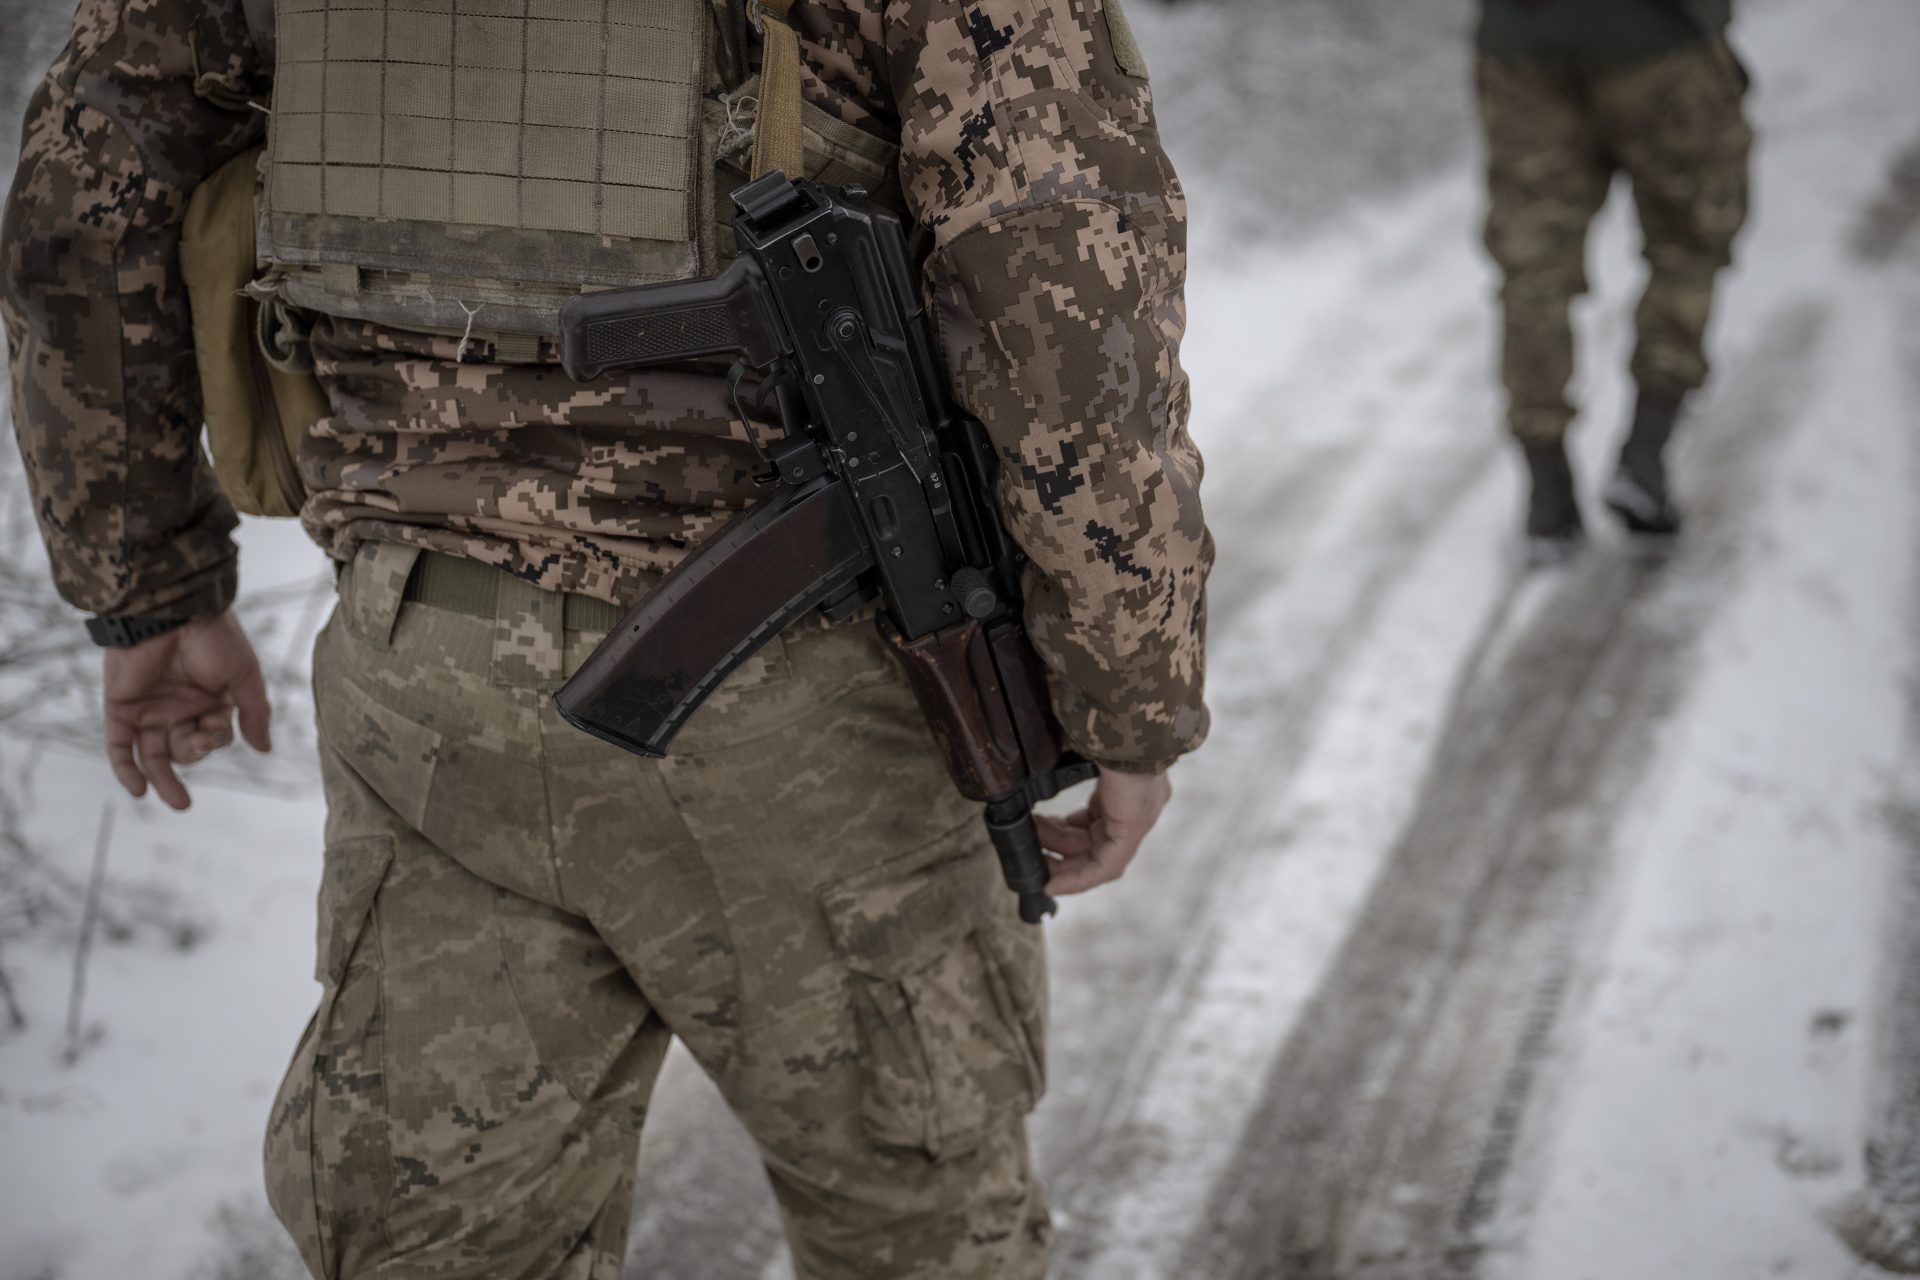 A Ukrainian soldier revealed the horrors of the frontline